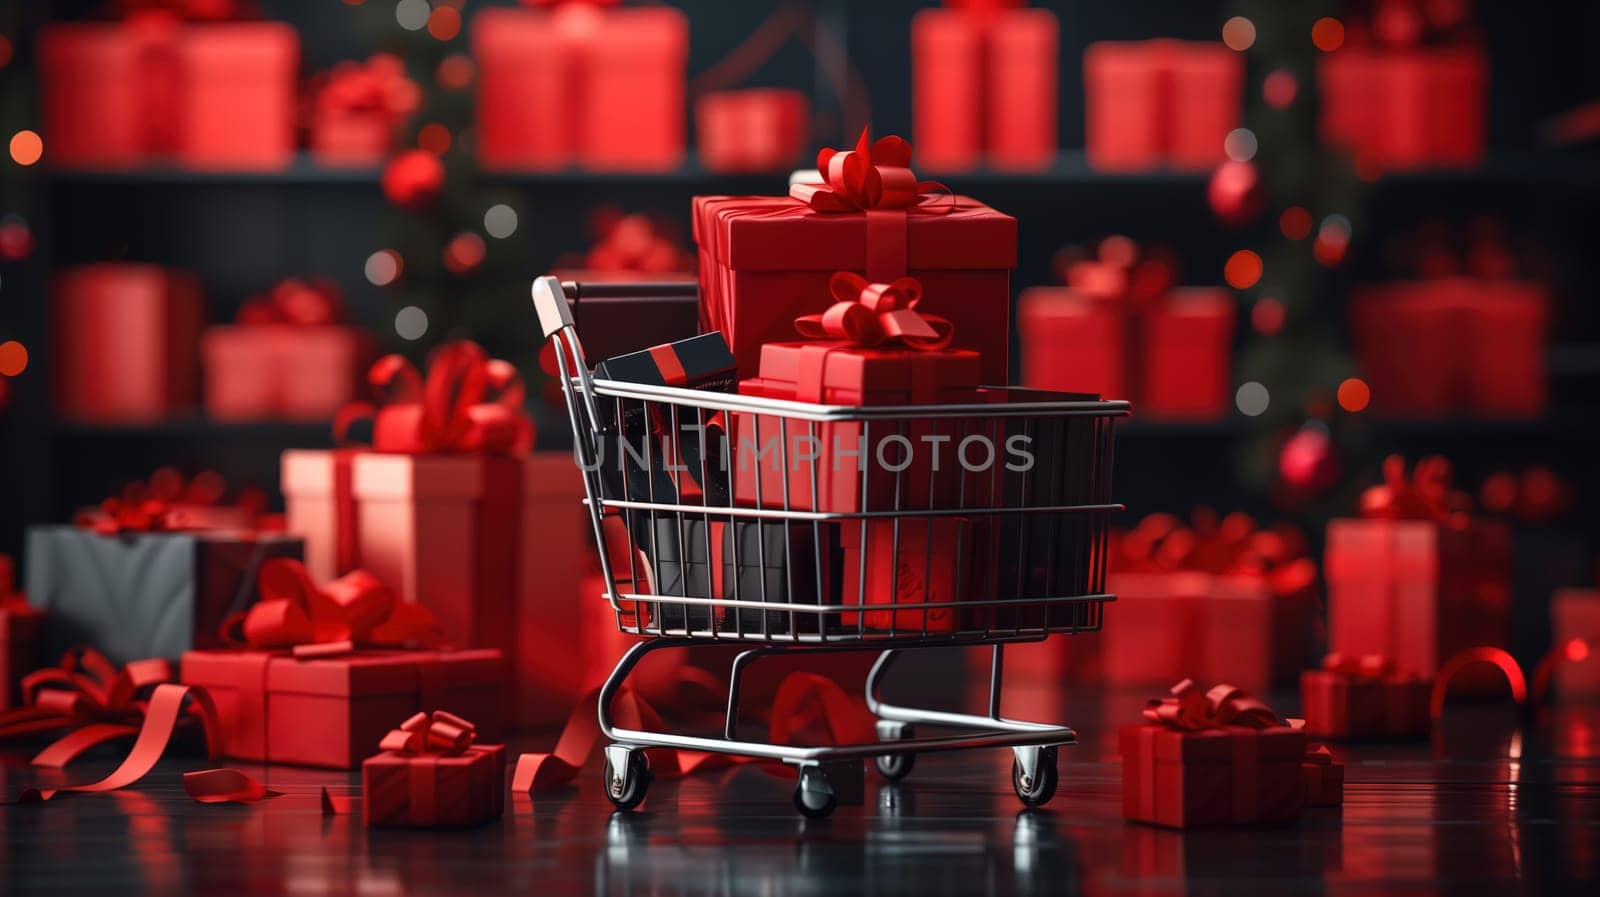 A shopping cart filled with colorful presents is positioned in front of a beautifully decorated Christmas tree. The scene captures the essence of holiday shopping during the festive season.